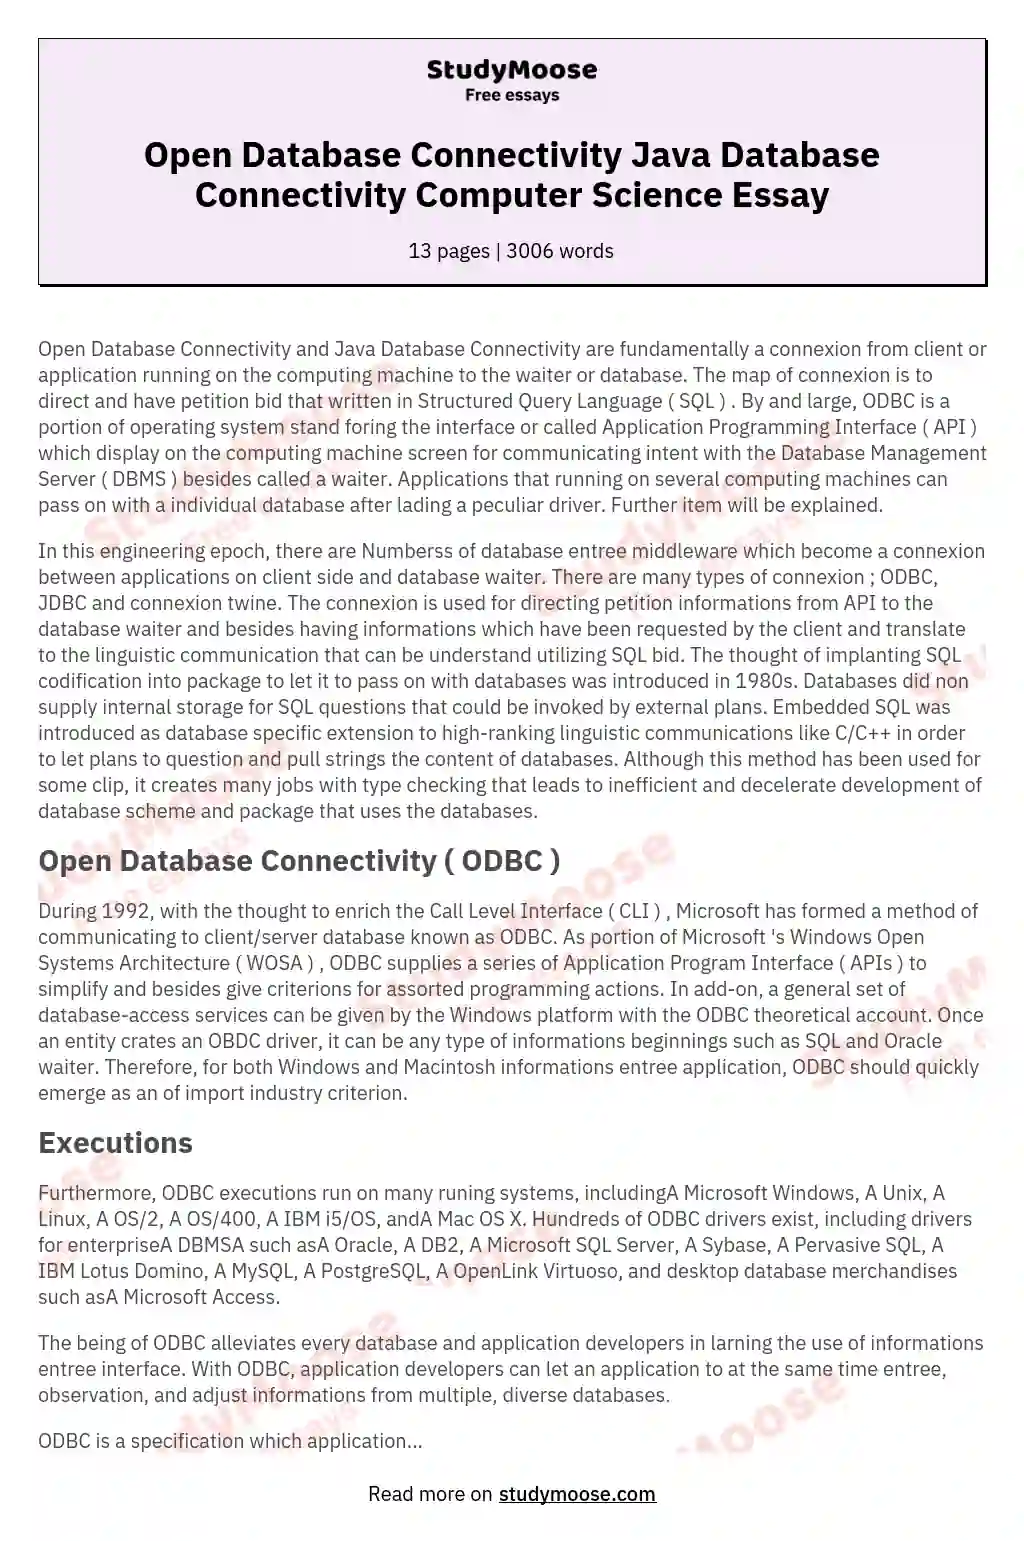 Open Database Connectivity Java Database Connectivity Computer Science Essay